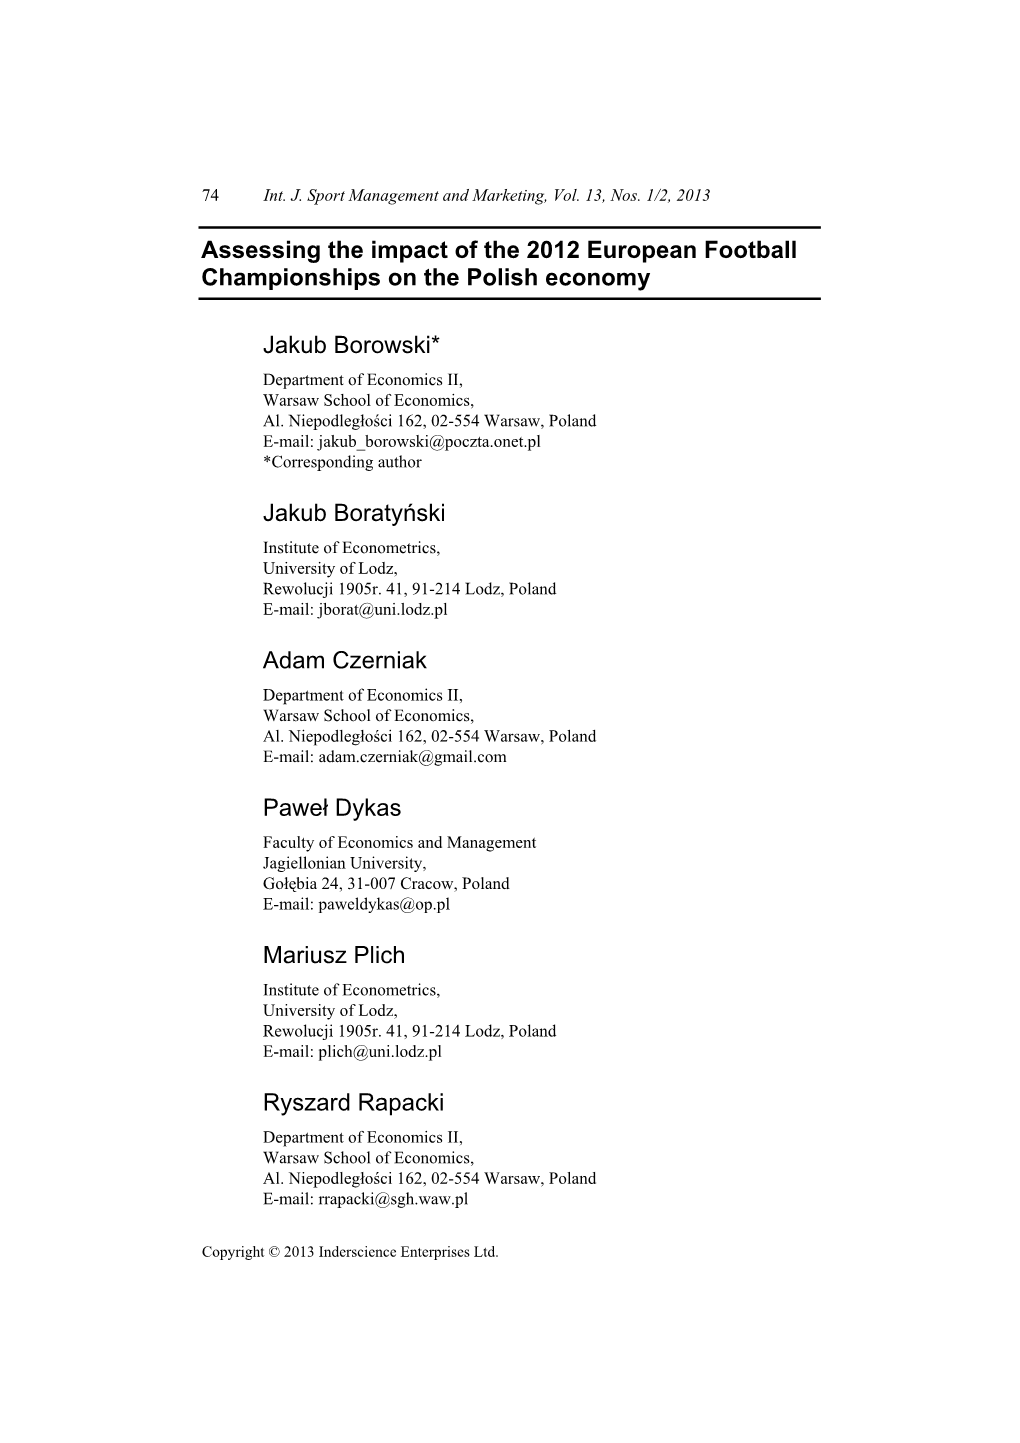 Assessing the Impact of the 2012 European Football Championships on the Polish Economy